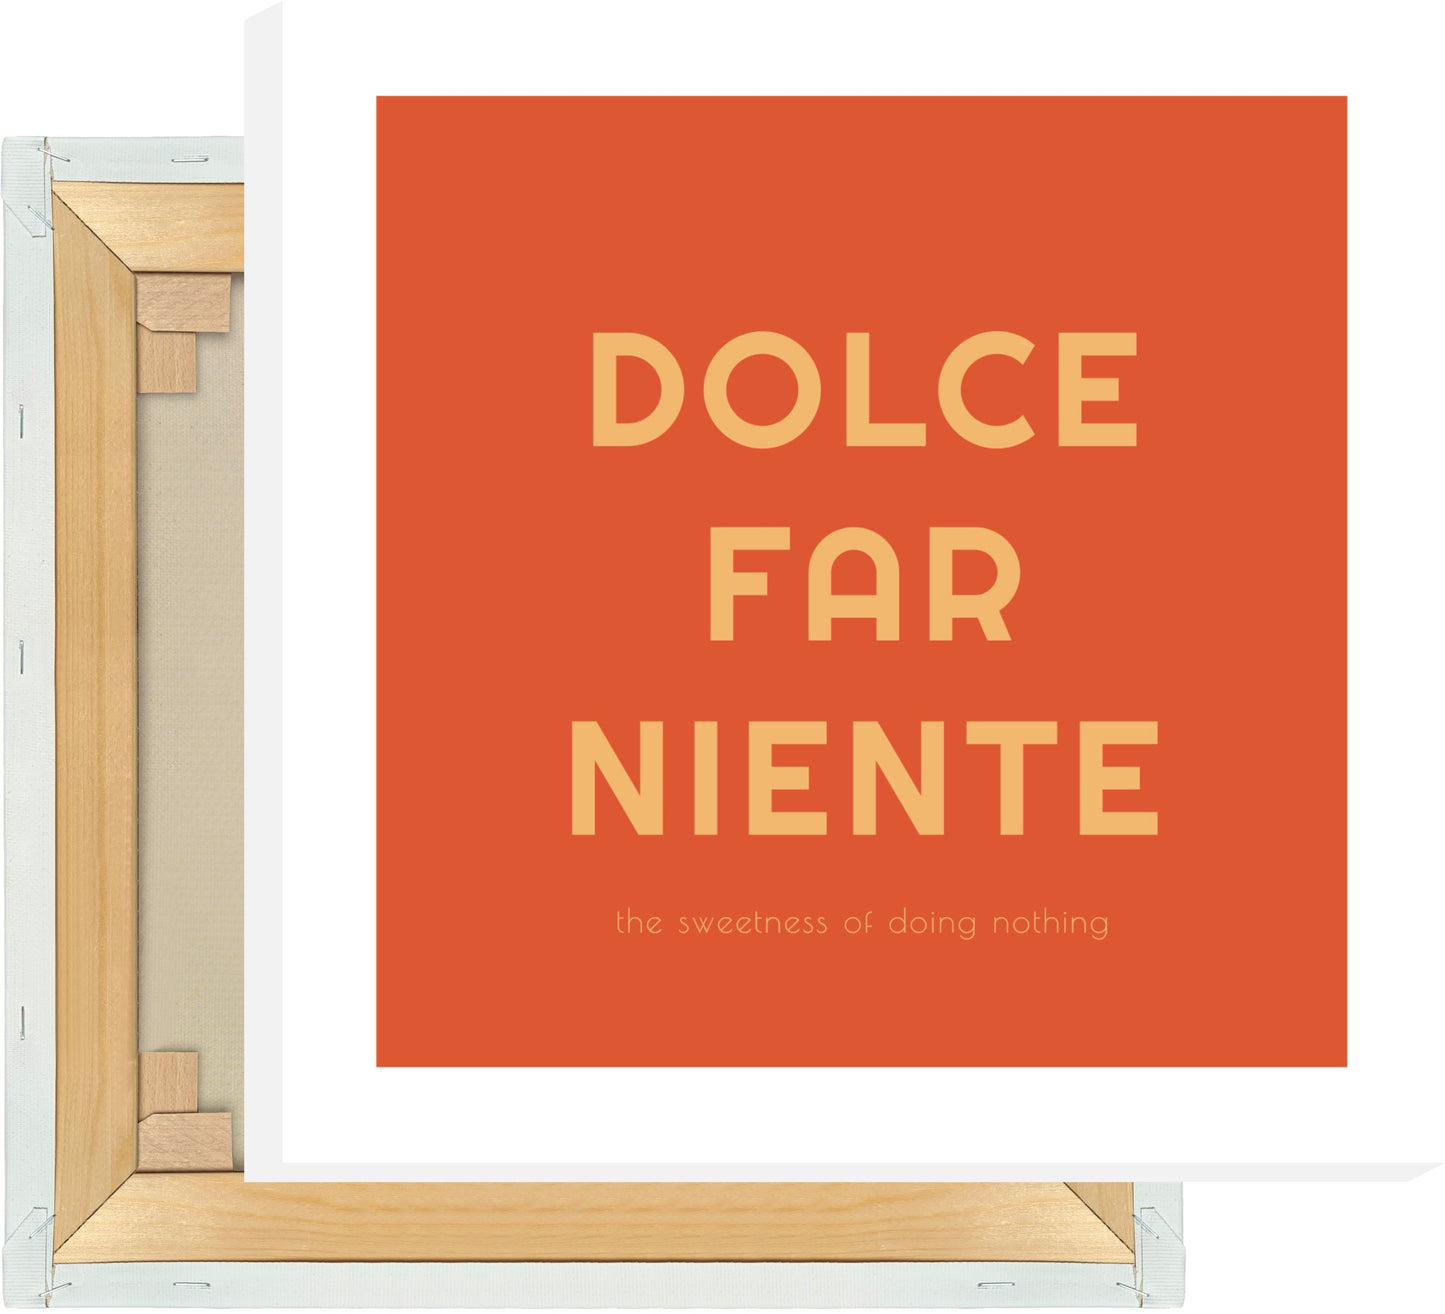 Leinwand Dolce Far Niente - The Sweetness Of Doing Nothing - La Dolce Vita Collection